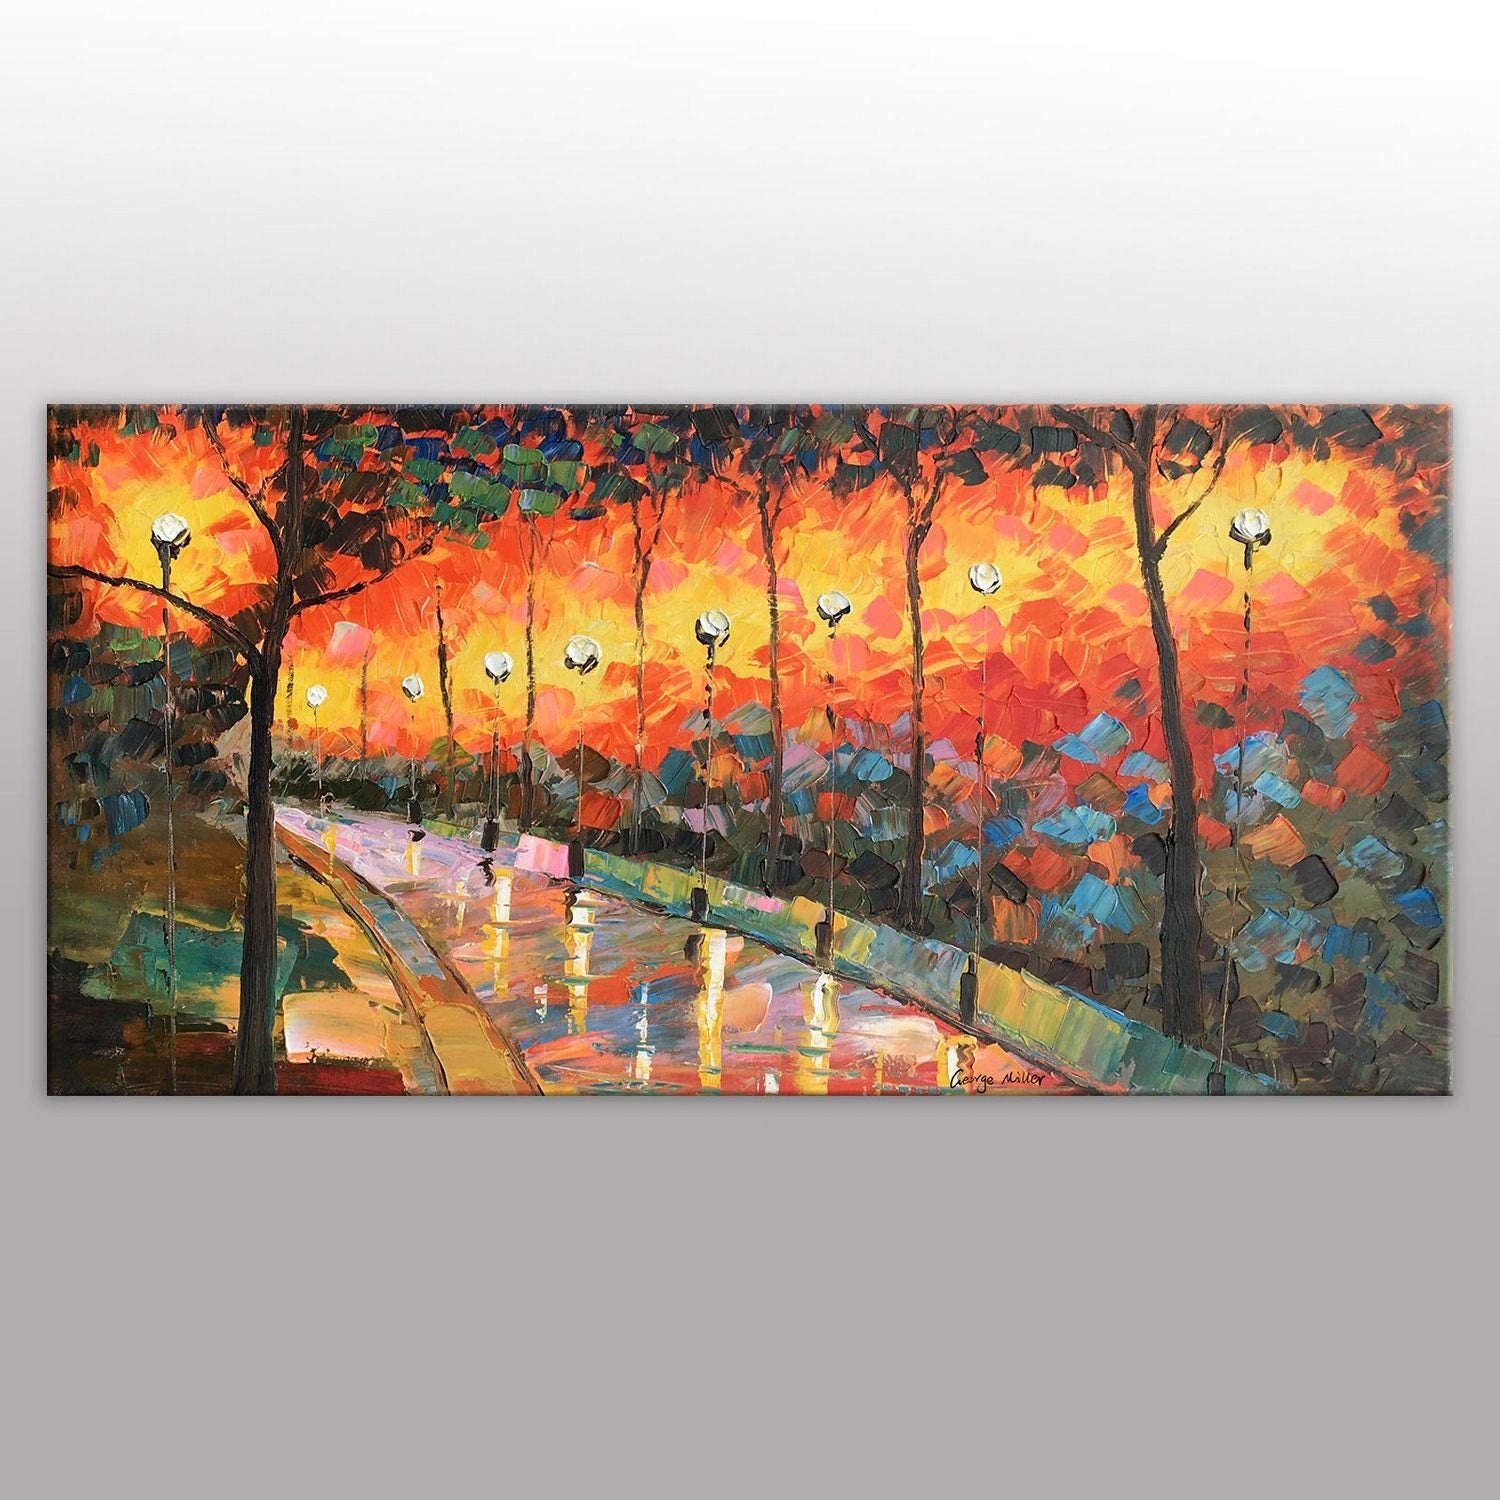 Transform your space with breathtaking Landscape Painting - Autumn Night, An Original Oil Painting by George Miller